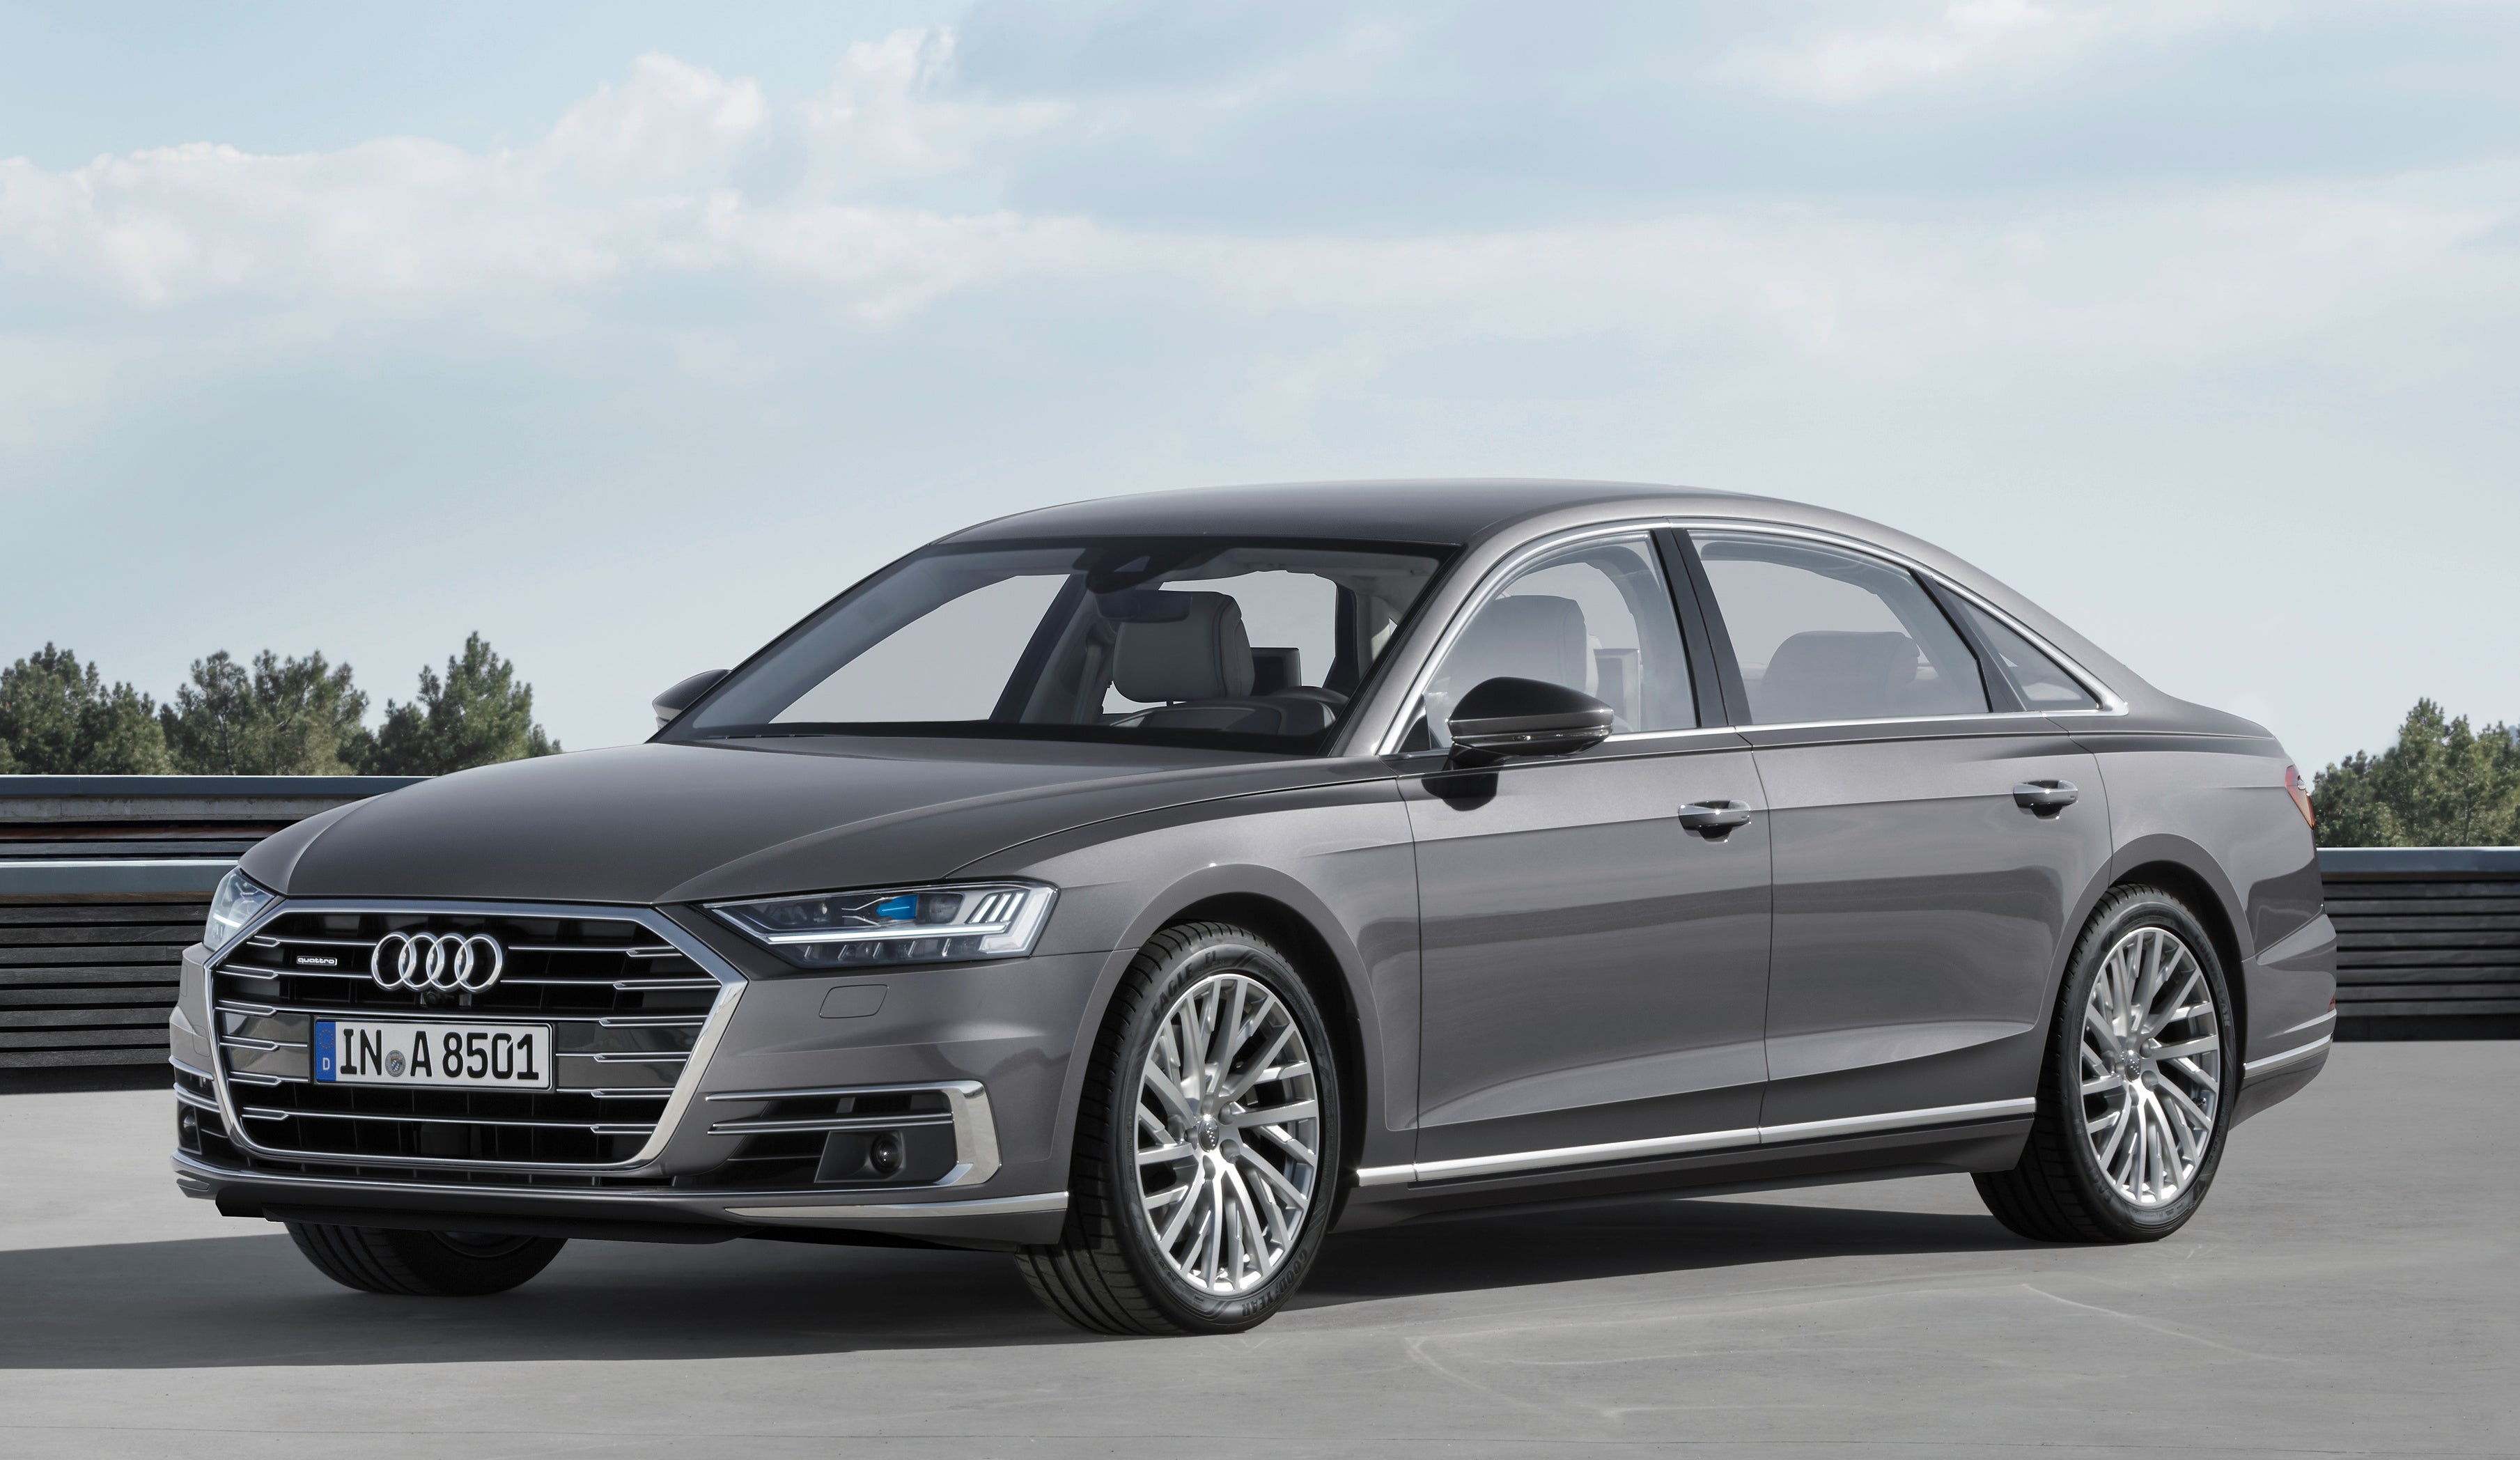 Audi S8 exterior restyling